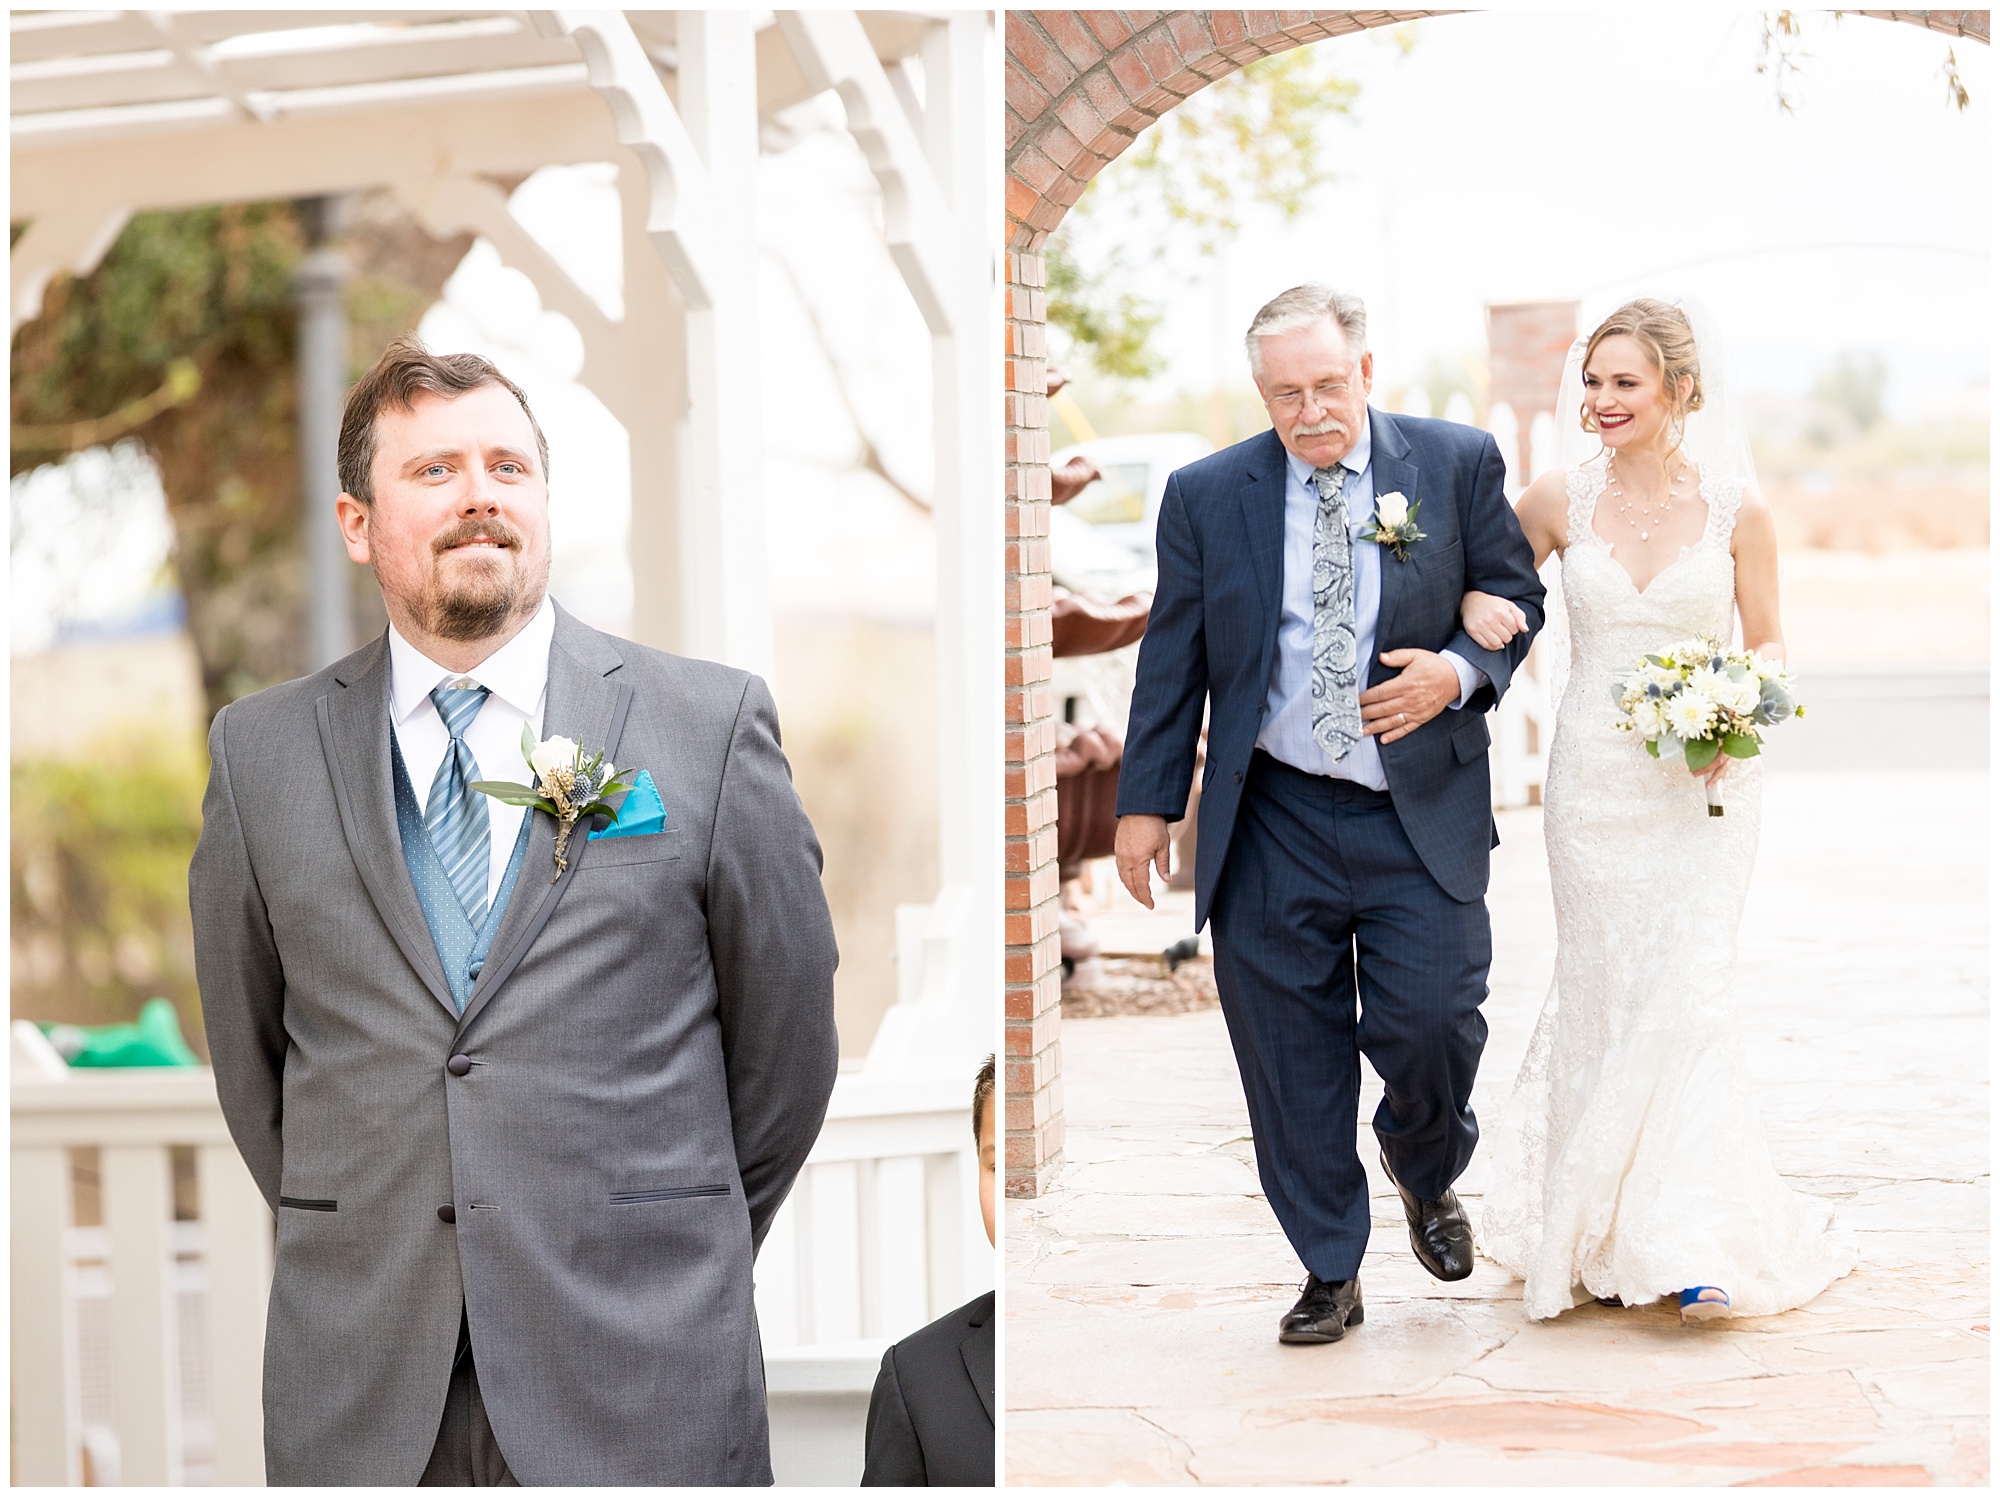 Old Town Wedding and Event Center : Trevor and Caite